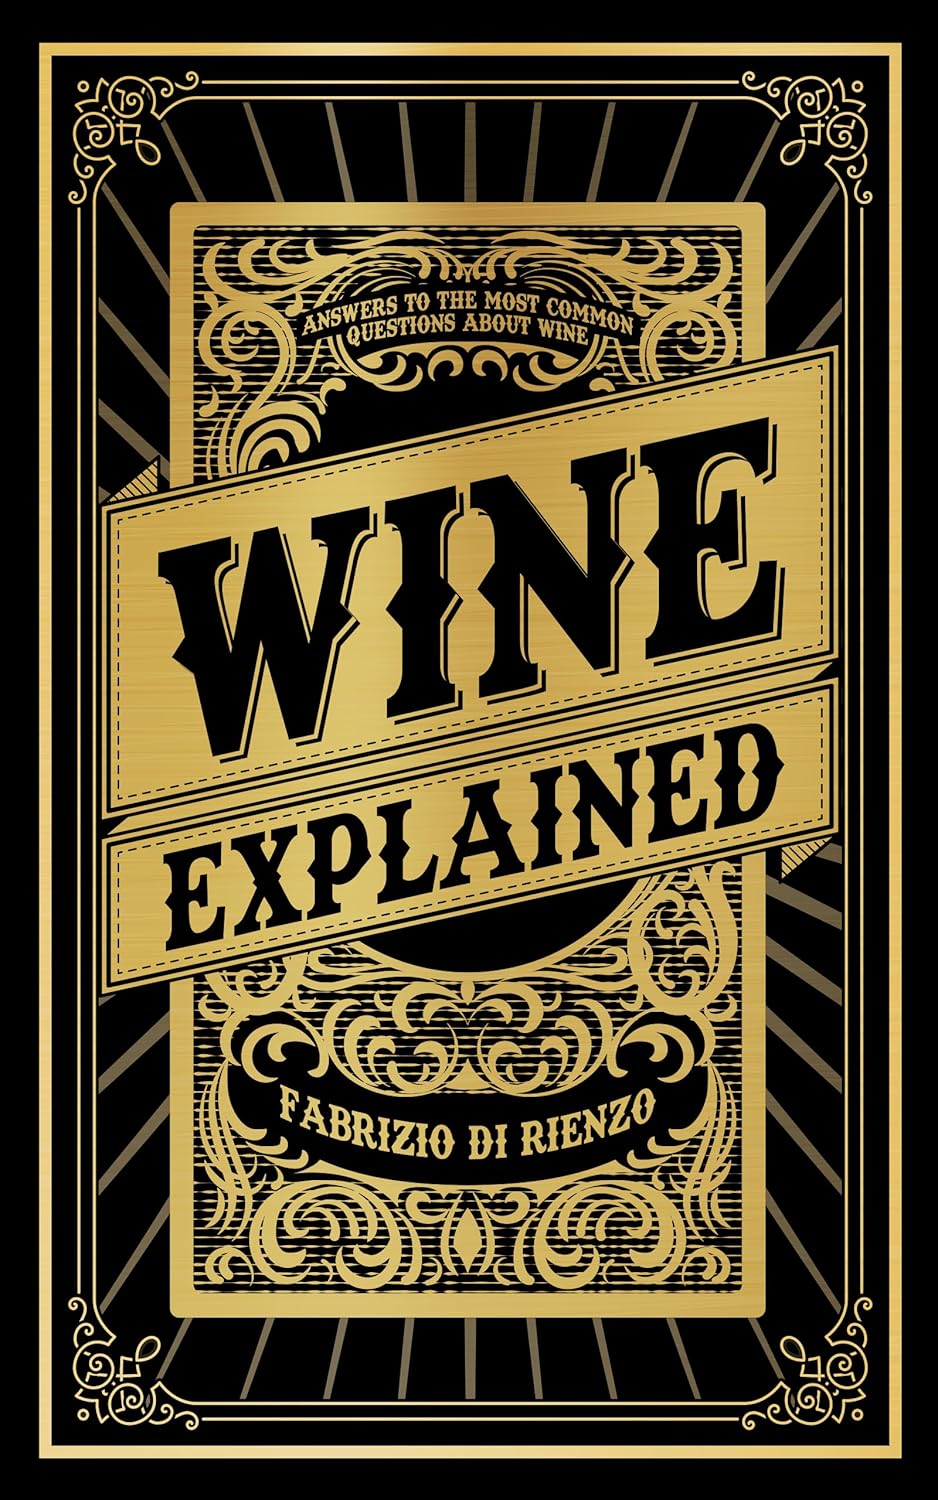 New book "Wine Explained" by Fabrizio Di Rienzo is released, an in-depth, comprehensive, and accessible guide to all things wine